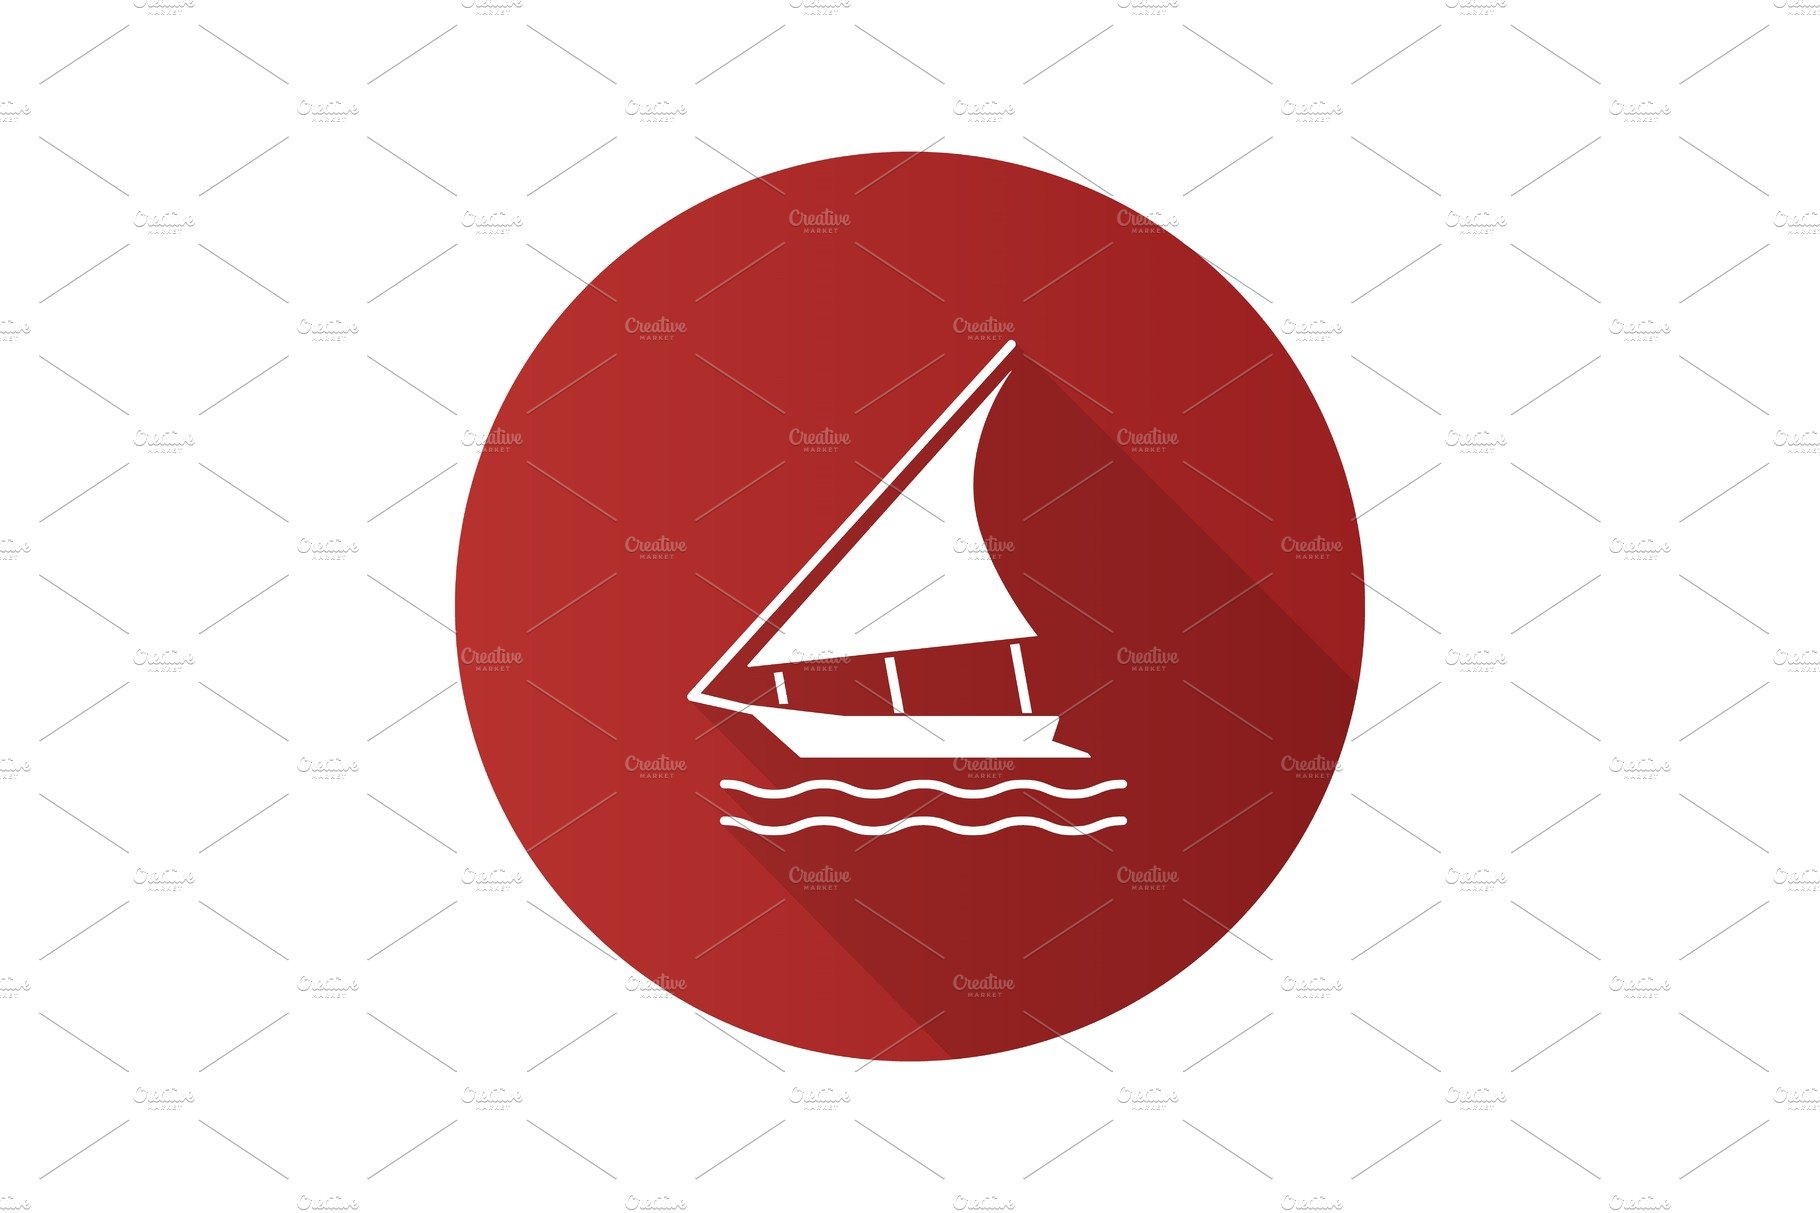 Sailing boat flat design long shadow glyph icon cover image.